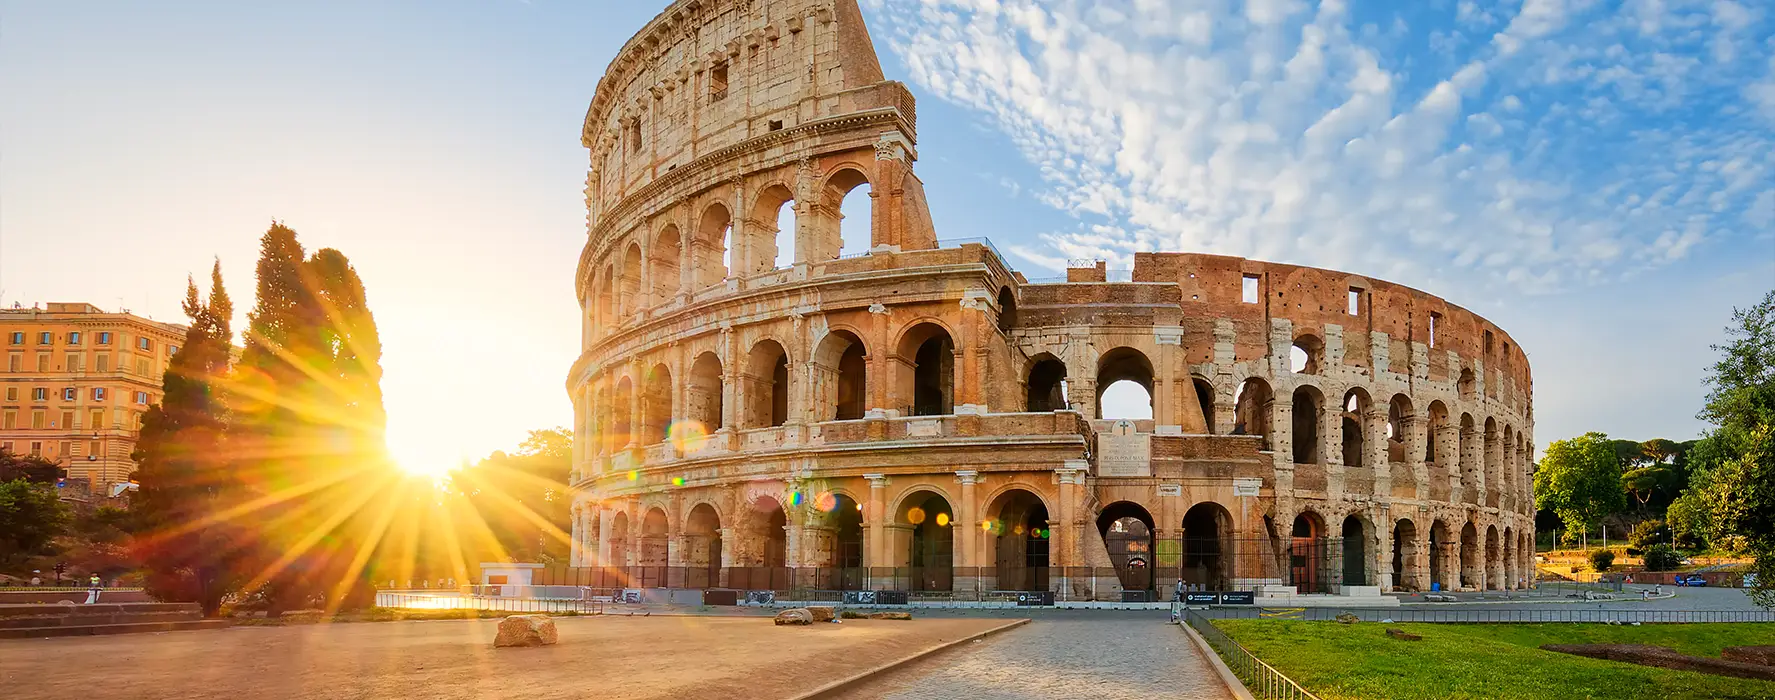 The Colosseum in Italy.